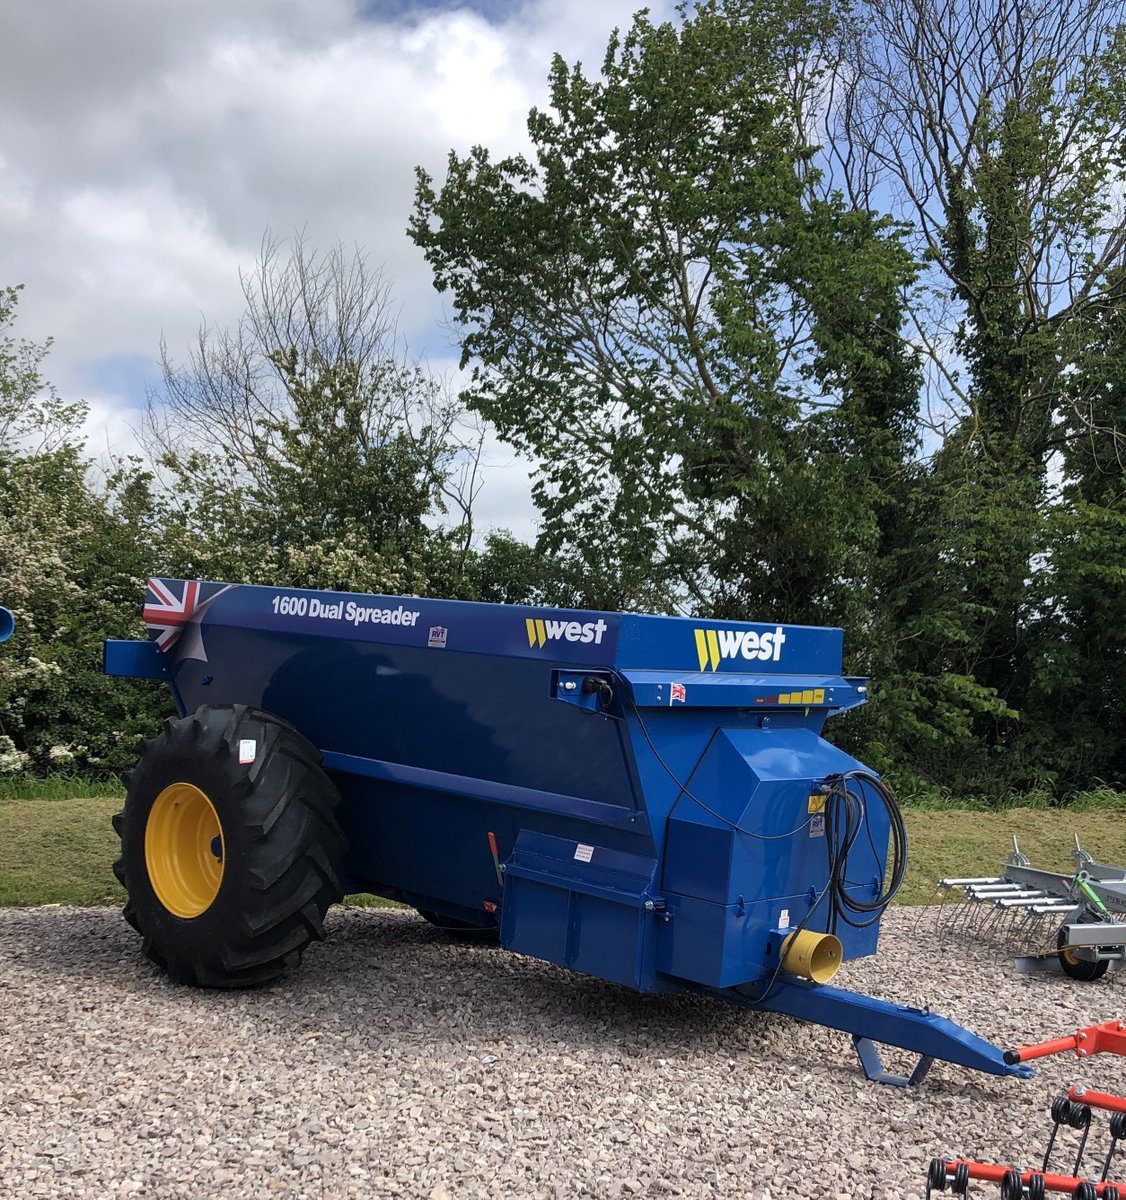 Today, John will be at Rea Valley Tractors Ltd Denbigh 12pm-9pm. Our West 1600 Dual spreader will be on display. If you would like any information on our products, please speak to John who will be happy to assist.
#harrywest #muckspreader #farming #reavalleytractors #agriculture